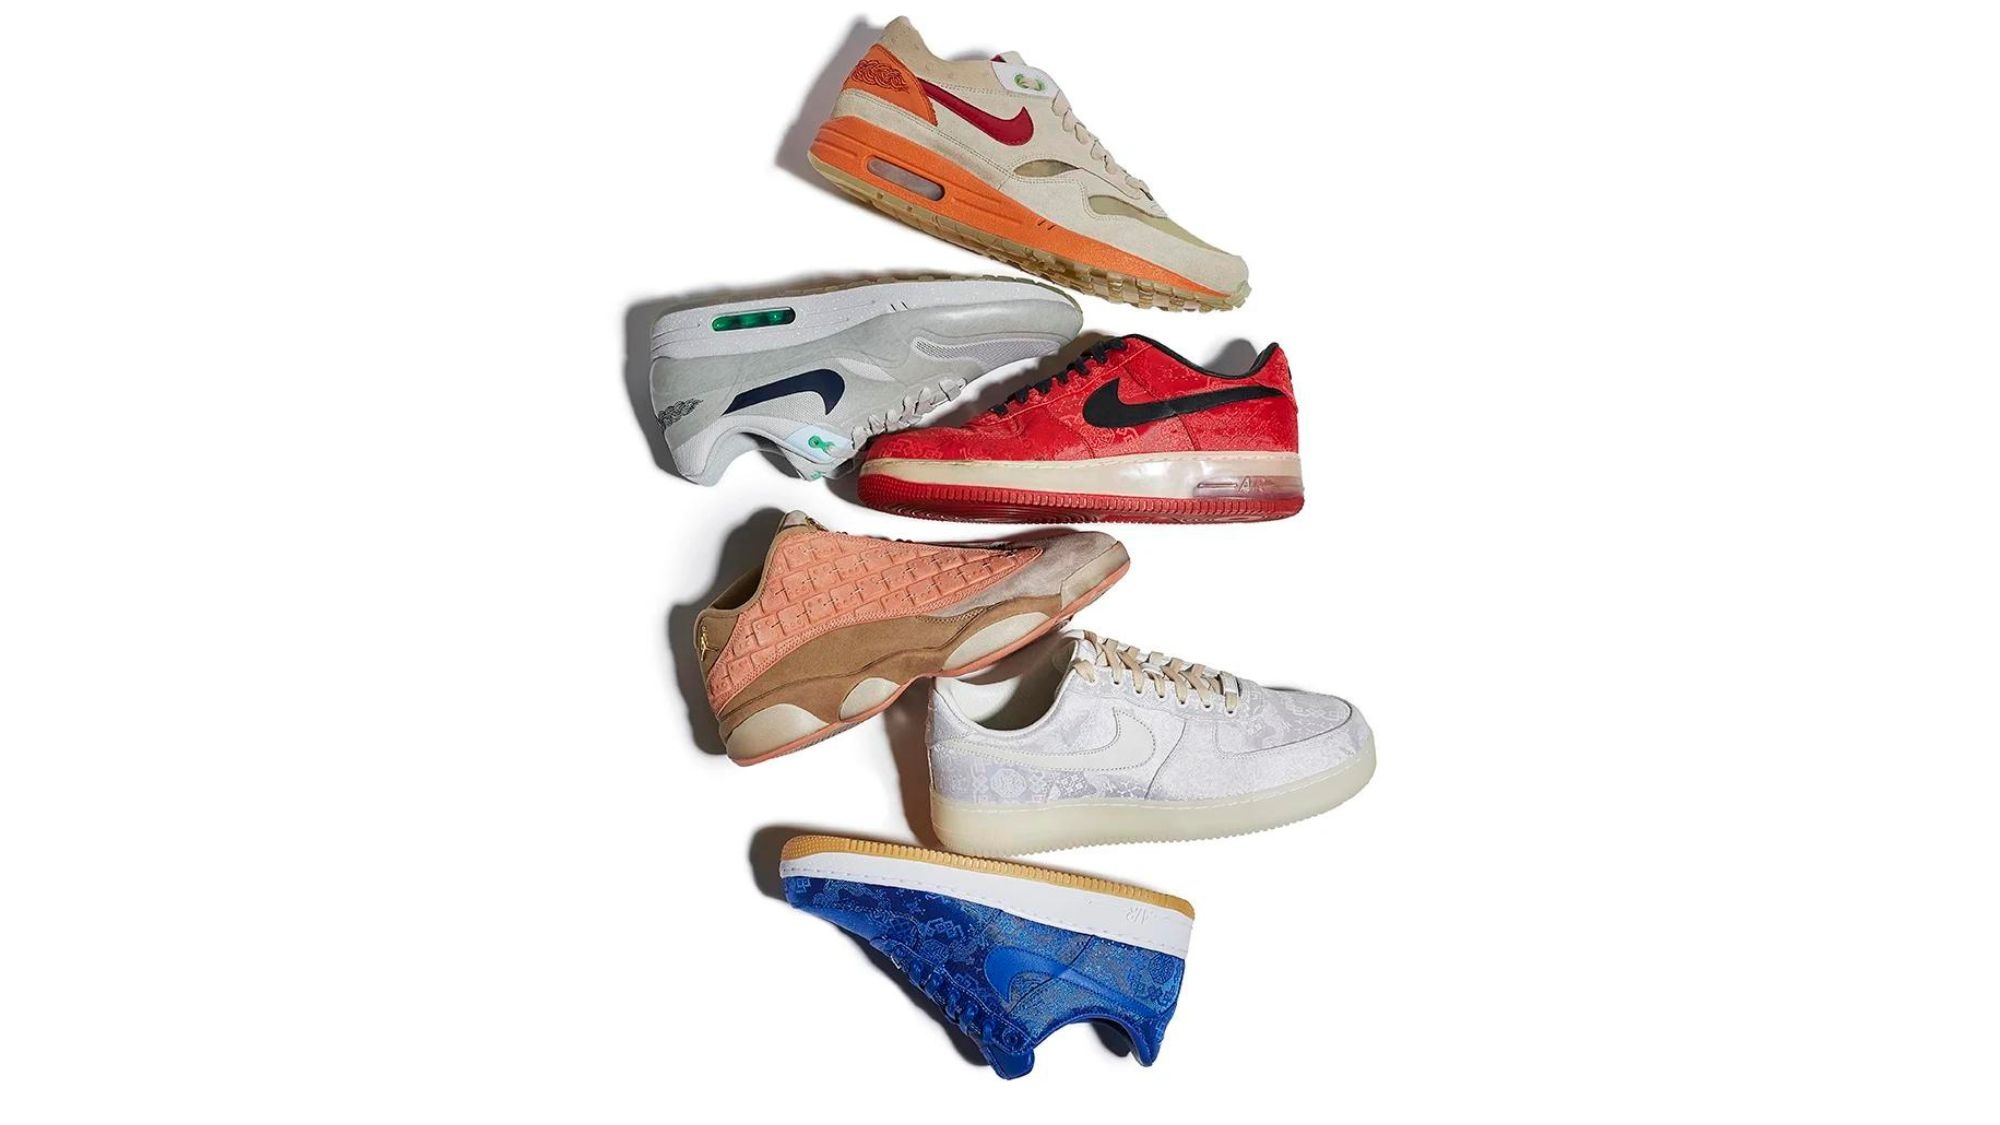 Since 2006, Nike and Clot have united on some instant sell-out collaborations, racking up high price premiums on resale sites. Now, theyre about to release their final sneakers. Photo: Clot x Nike 